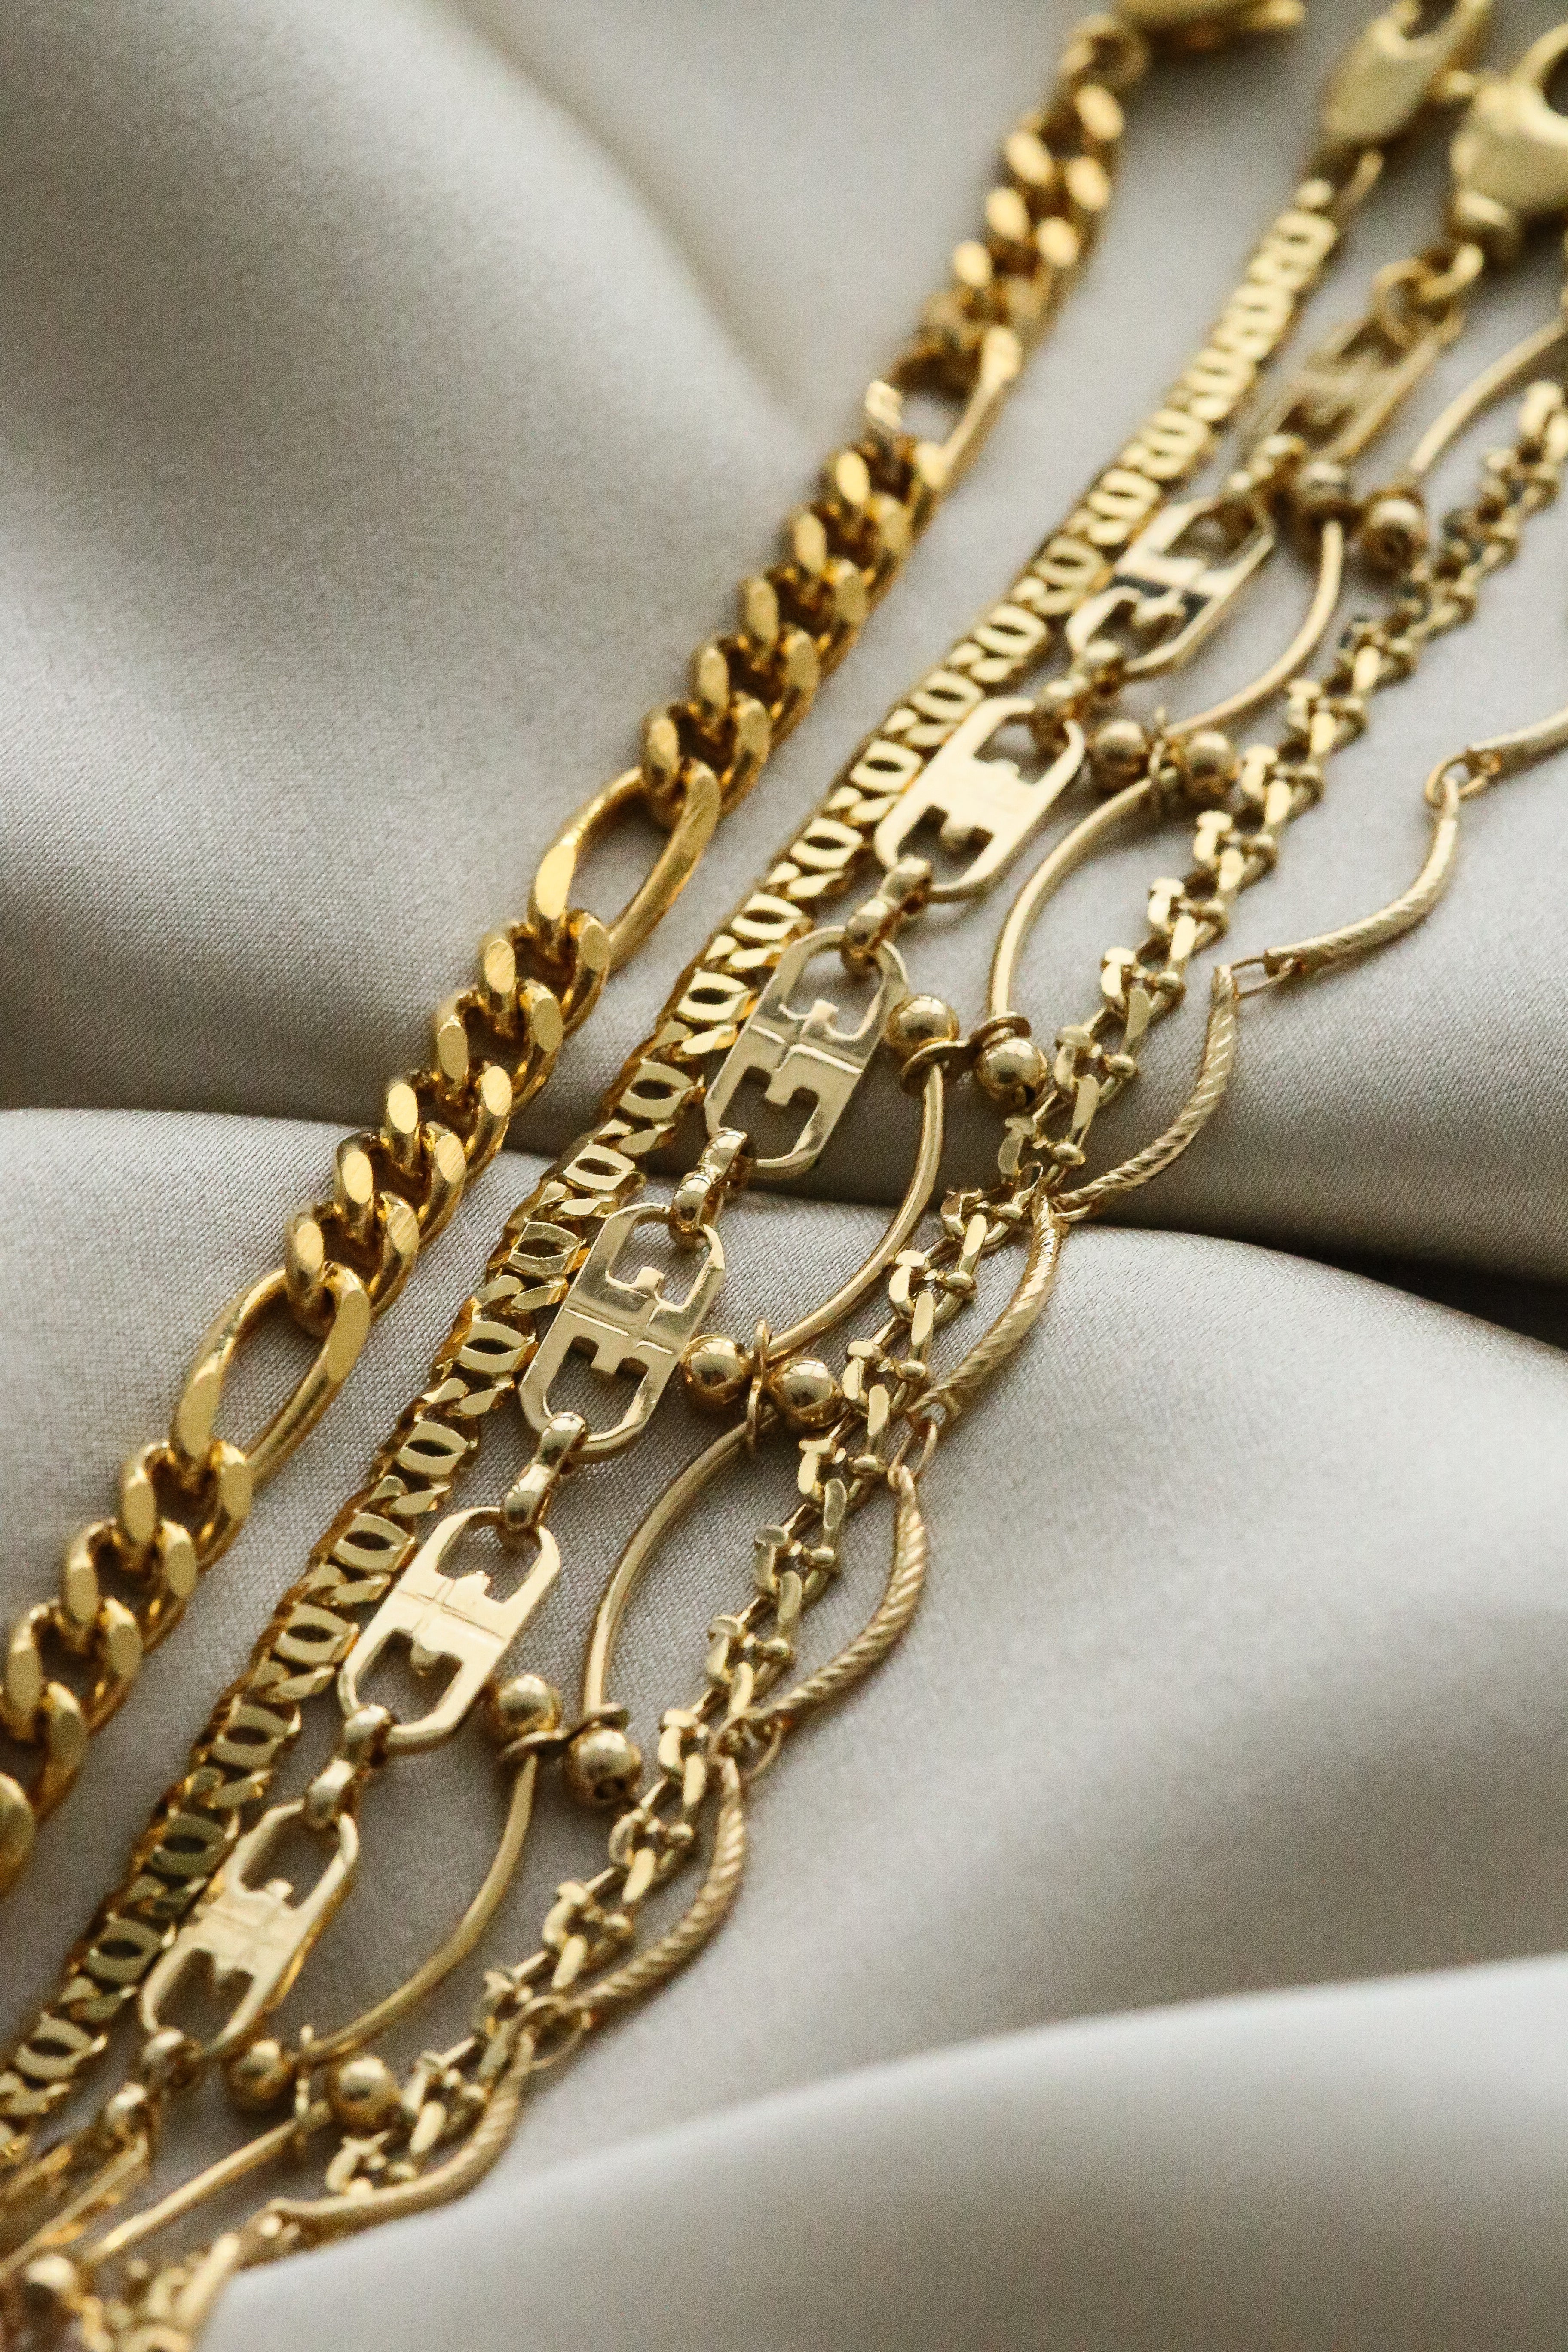 Italy (Vintage) Chain bracelet - Boutique Minimaliste has waterproof, durable, elegant and vintage inspired jewelry